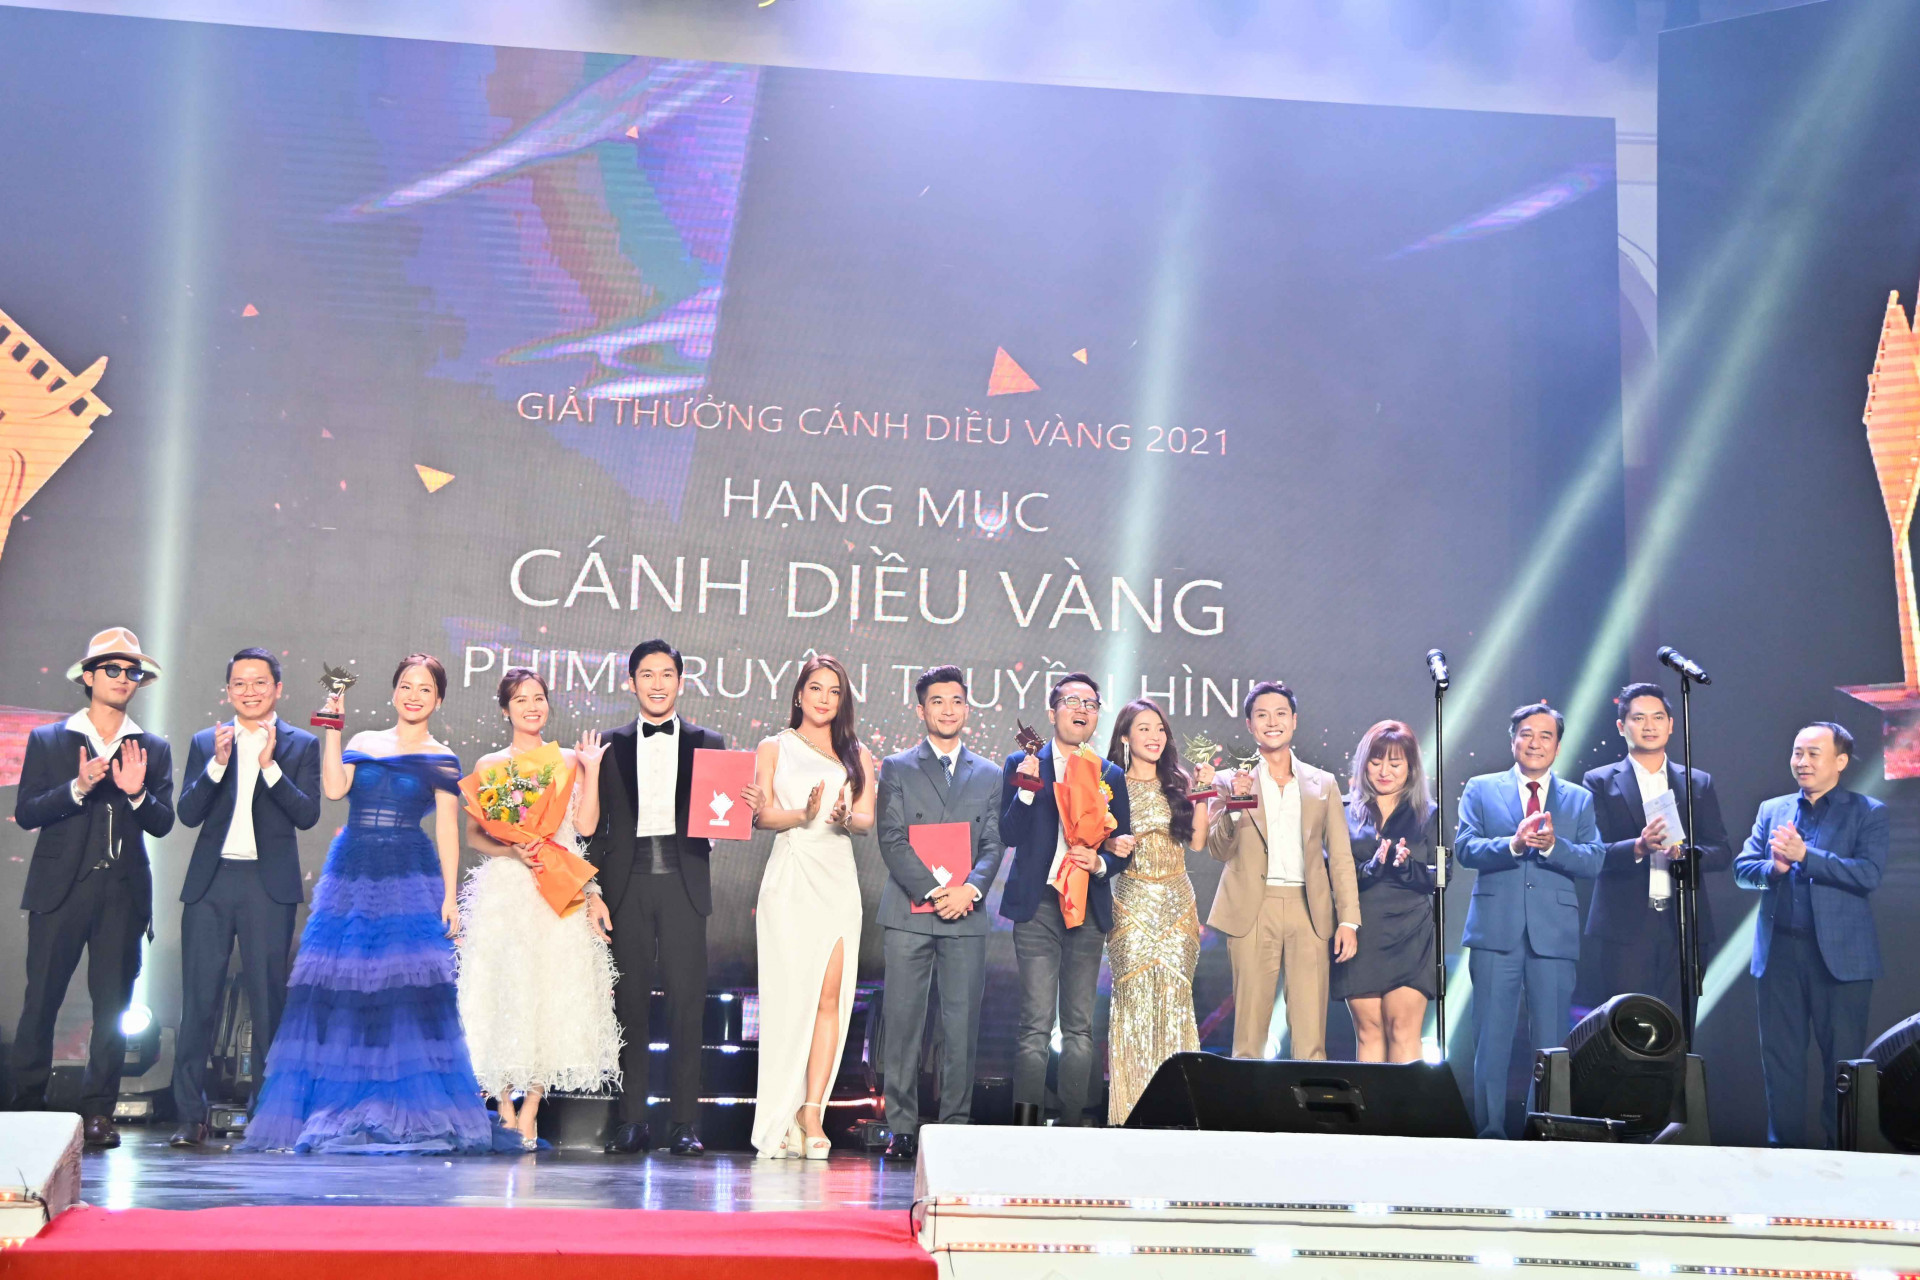 Gold prizes in TV drama series category given to “Thuong ngay nang ve” and “11 thang 5 ngay”